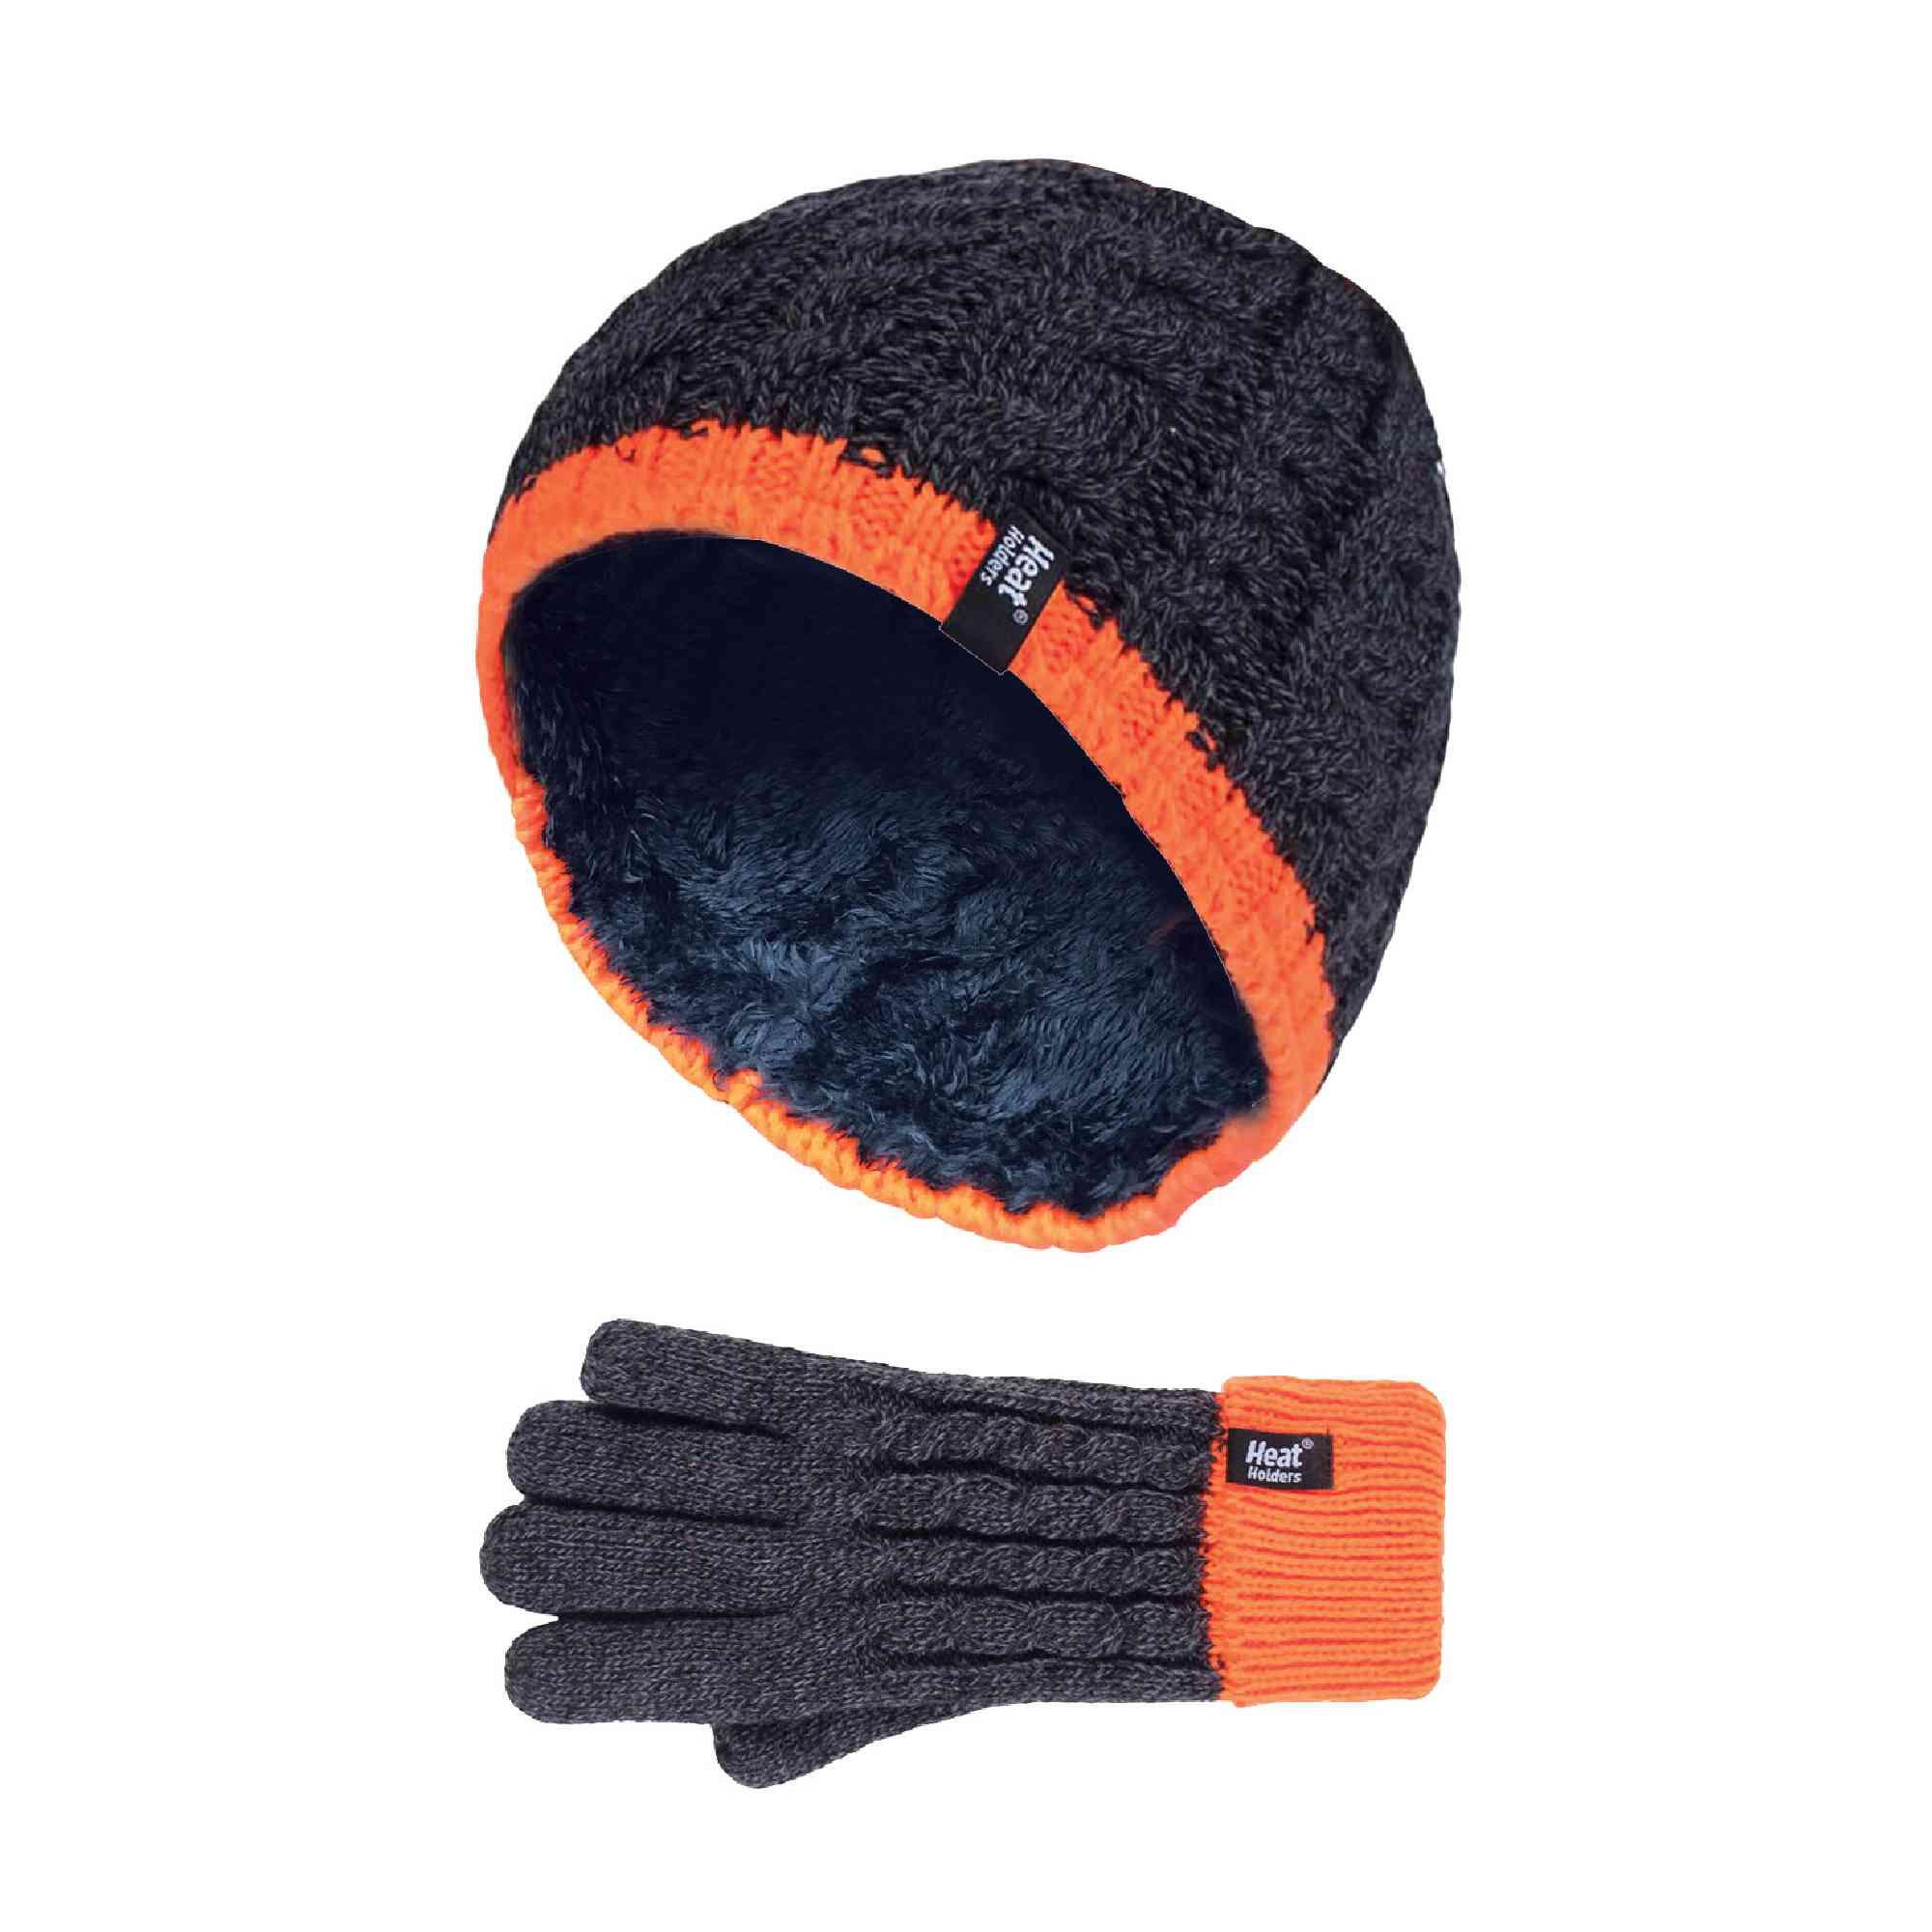 HEAT HOLDERS Boys Kids Cable Knit Warm Fleece Lined Thermal Winter Hat and Gloves Set